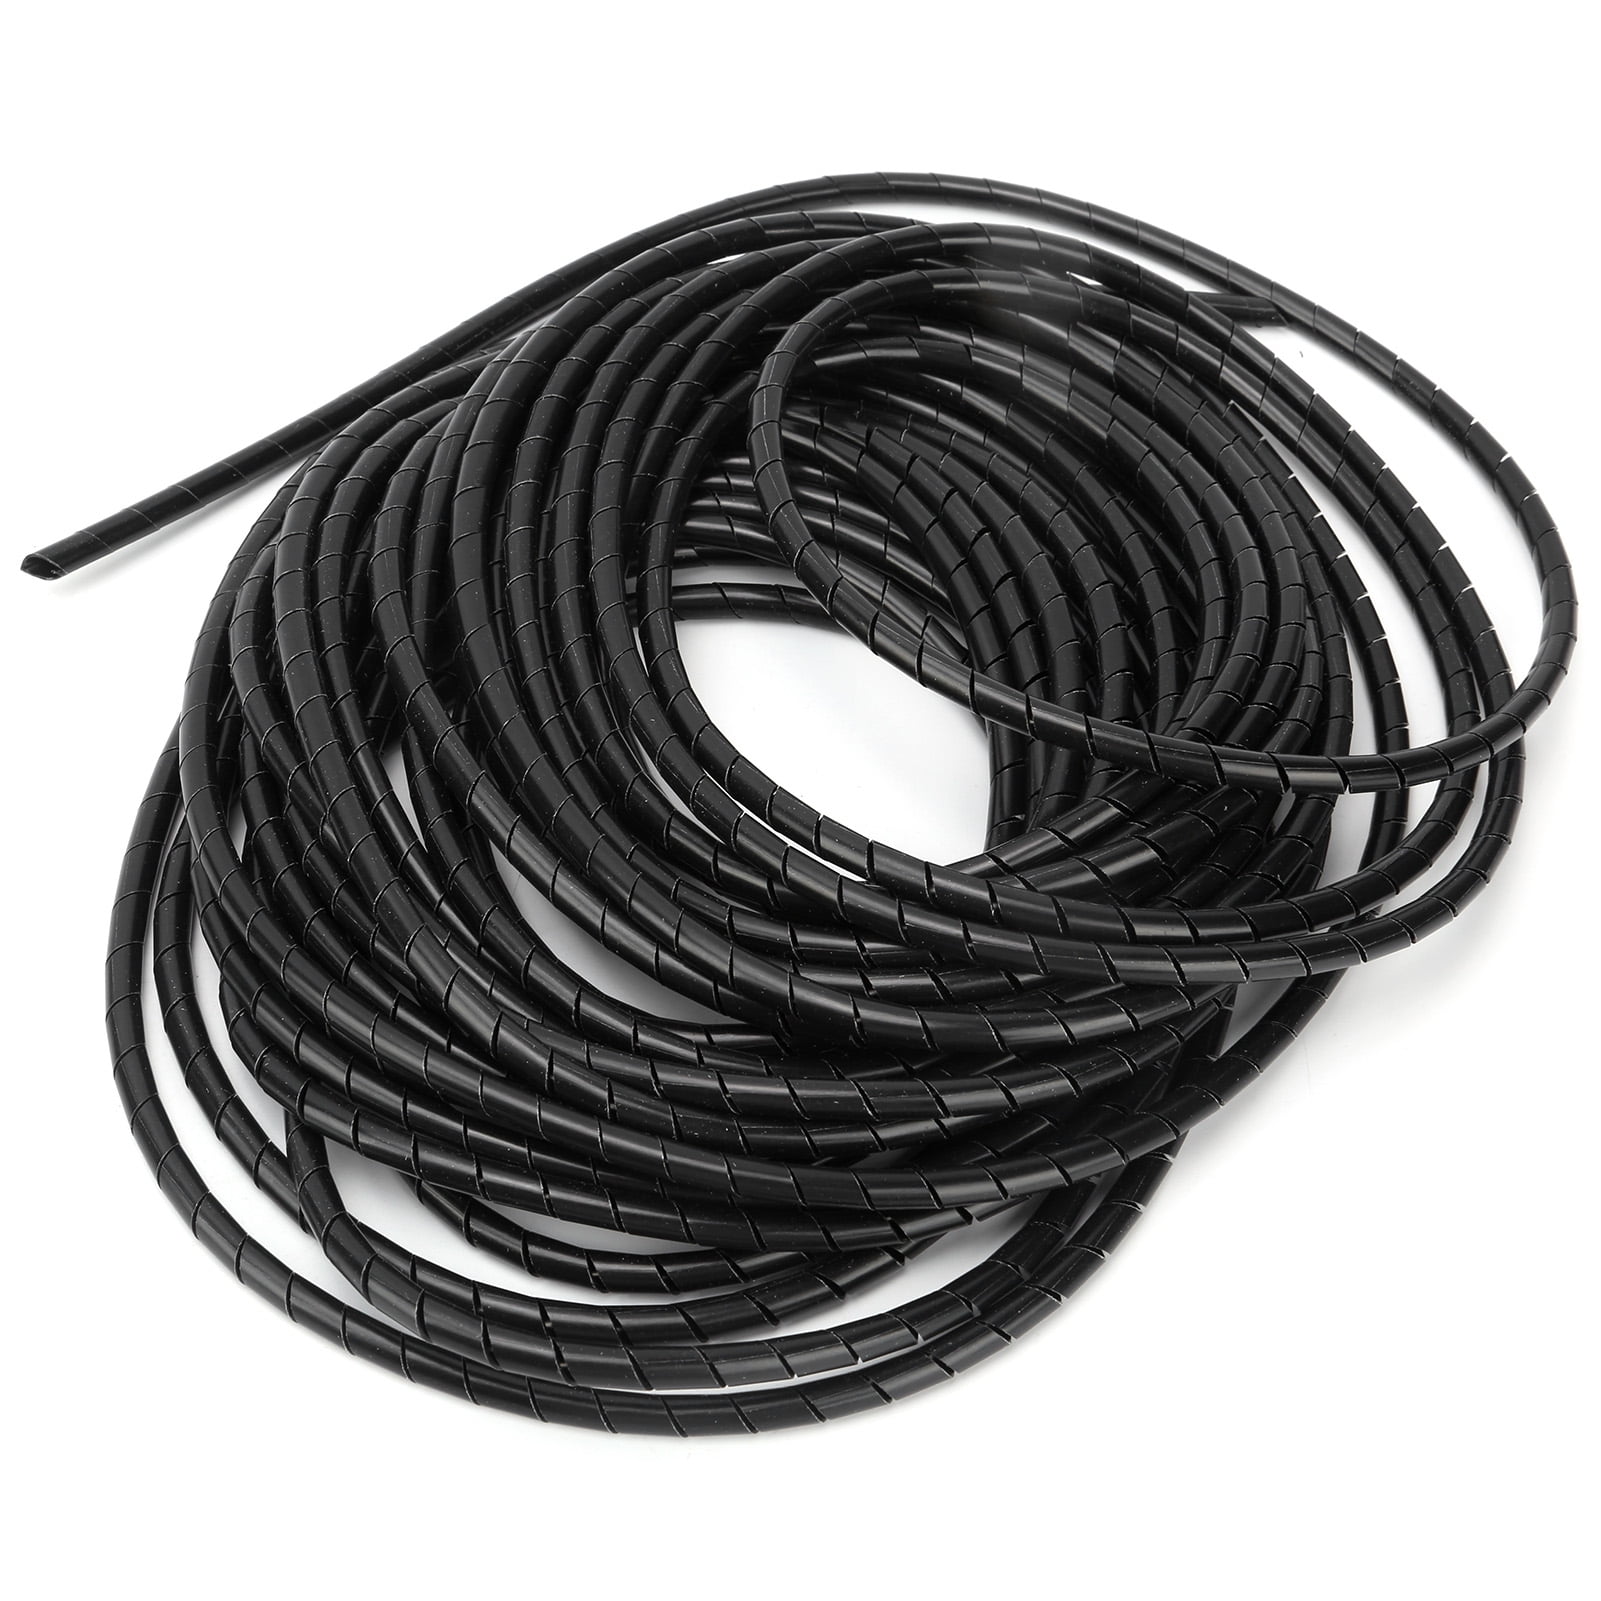 2 in Diameter Braided Sleeving Tubing Expandable Wire Flexible Harness  Cable Wrap Black 35ft